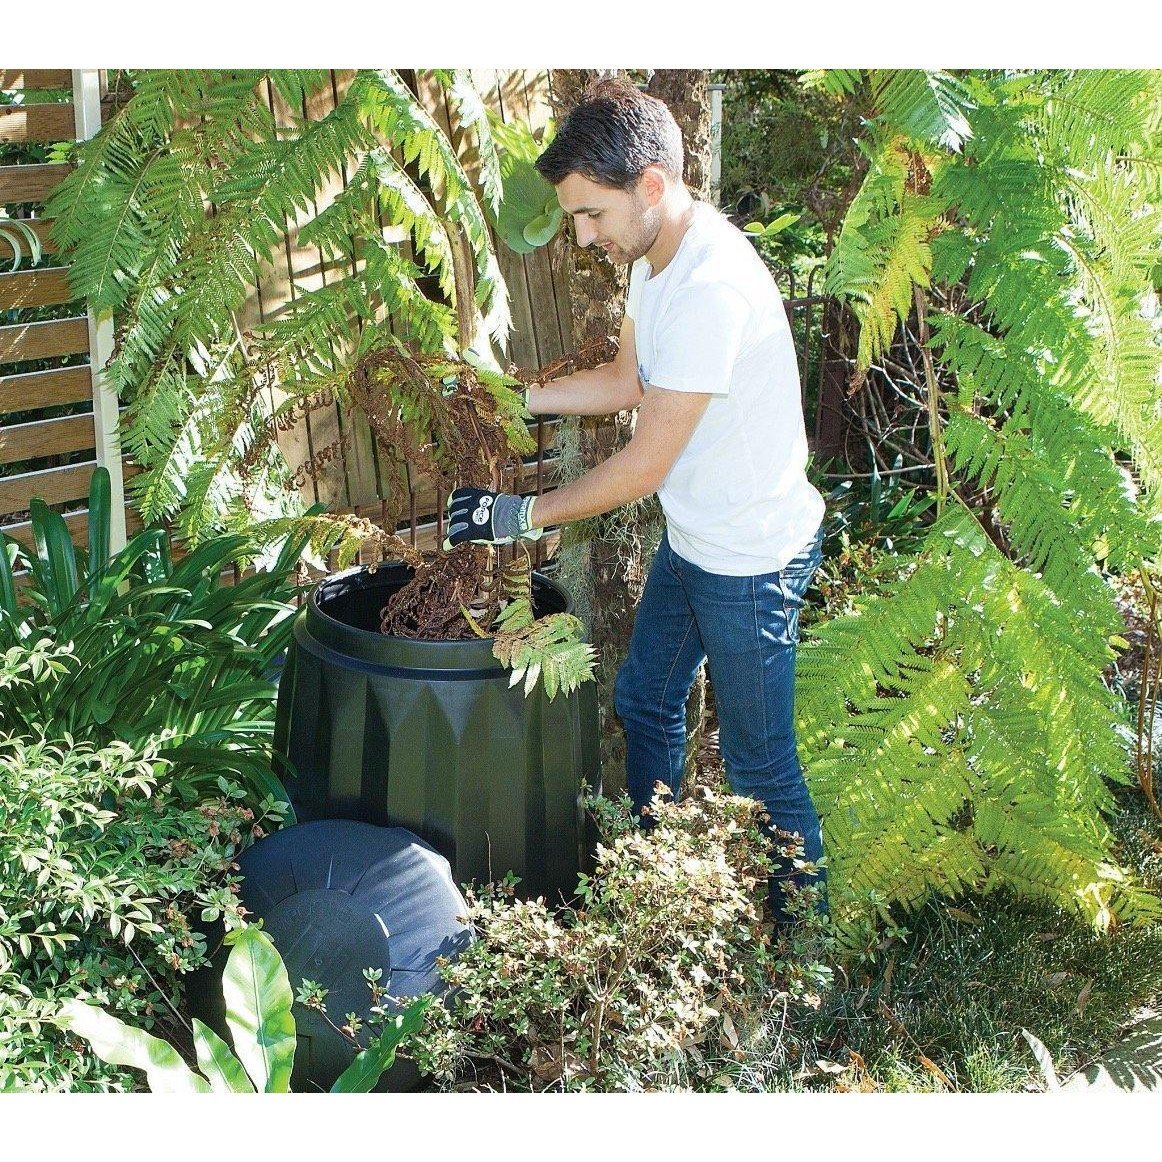 Adding Garden Waste to the 220 litre Gedyes Compost Bin, from RELN